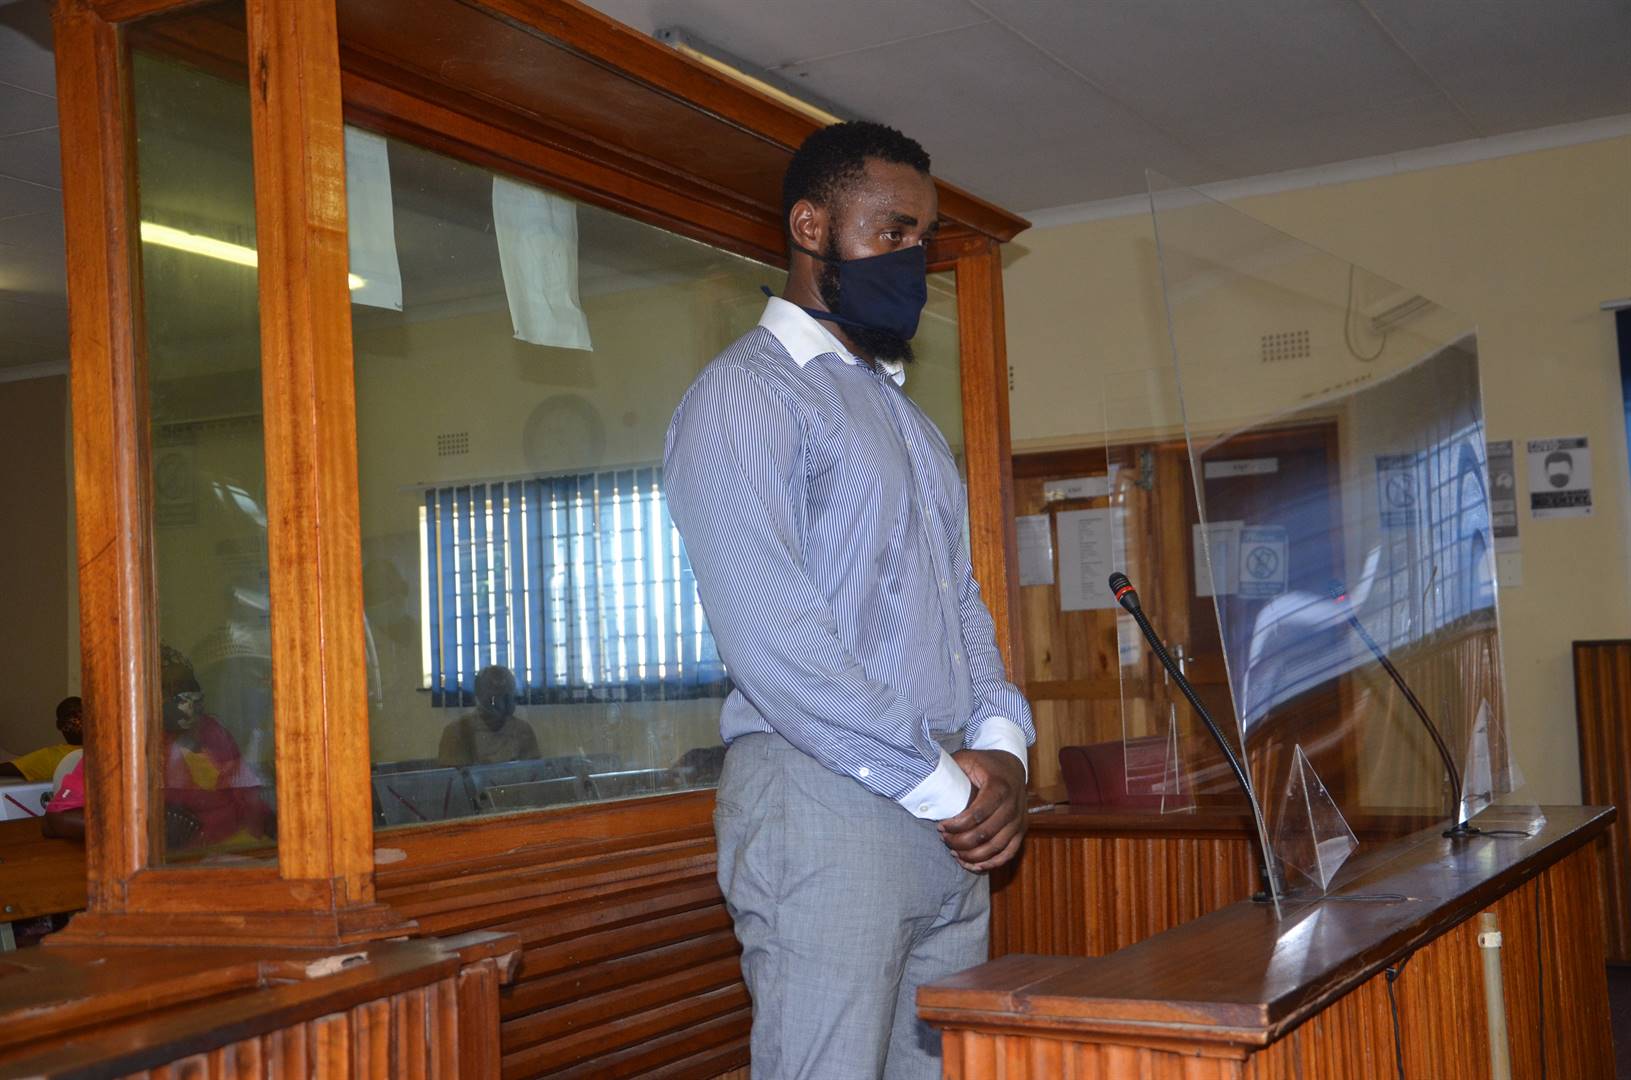 Difference Tiwane during his bail application. Photo by Oris Mnisi